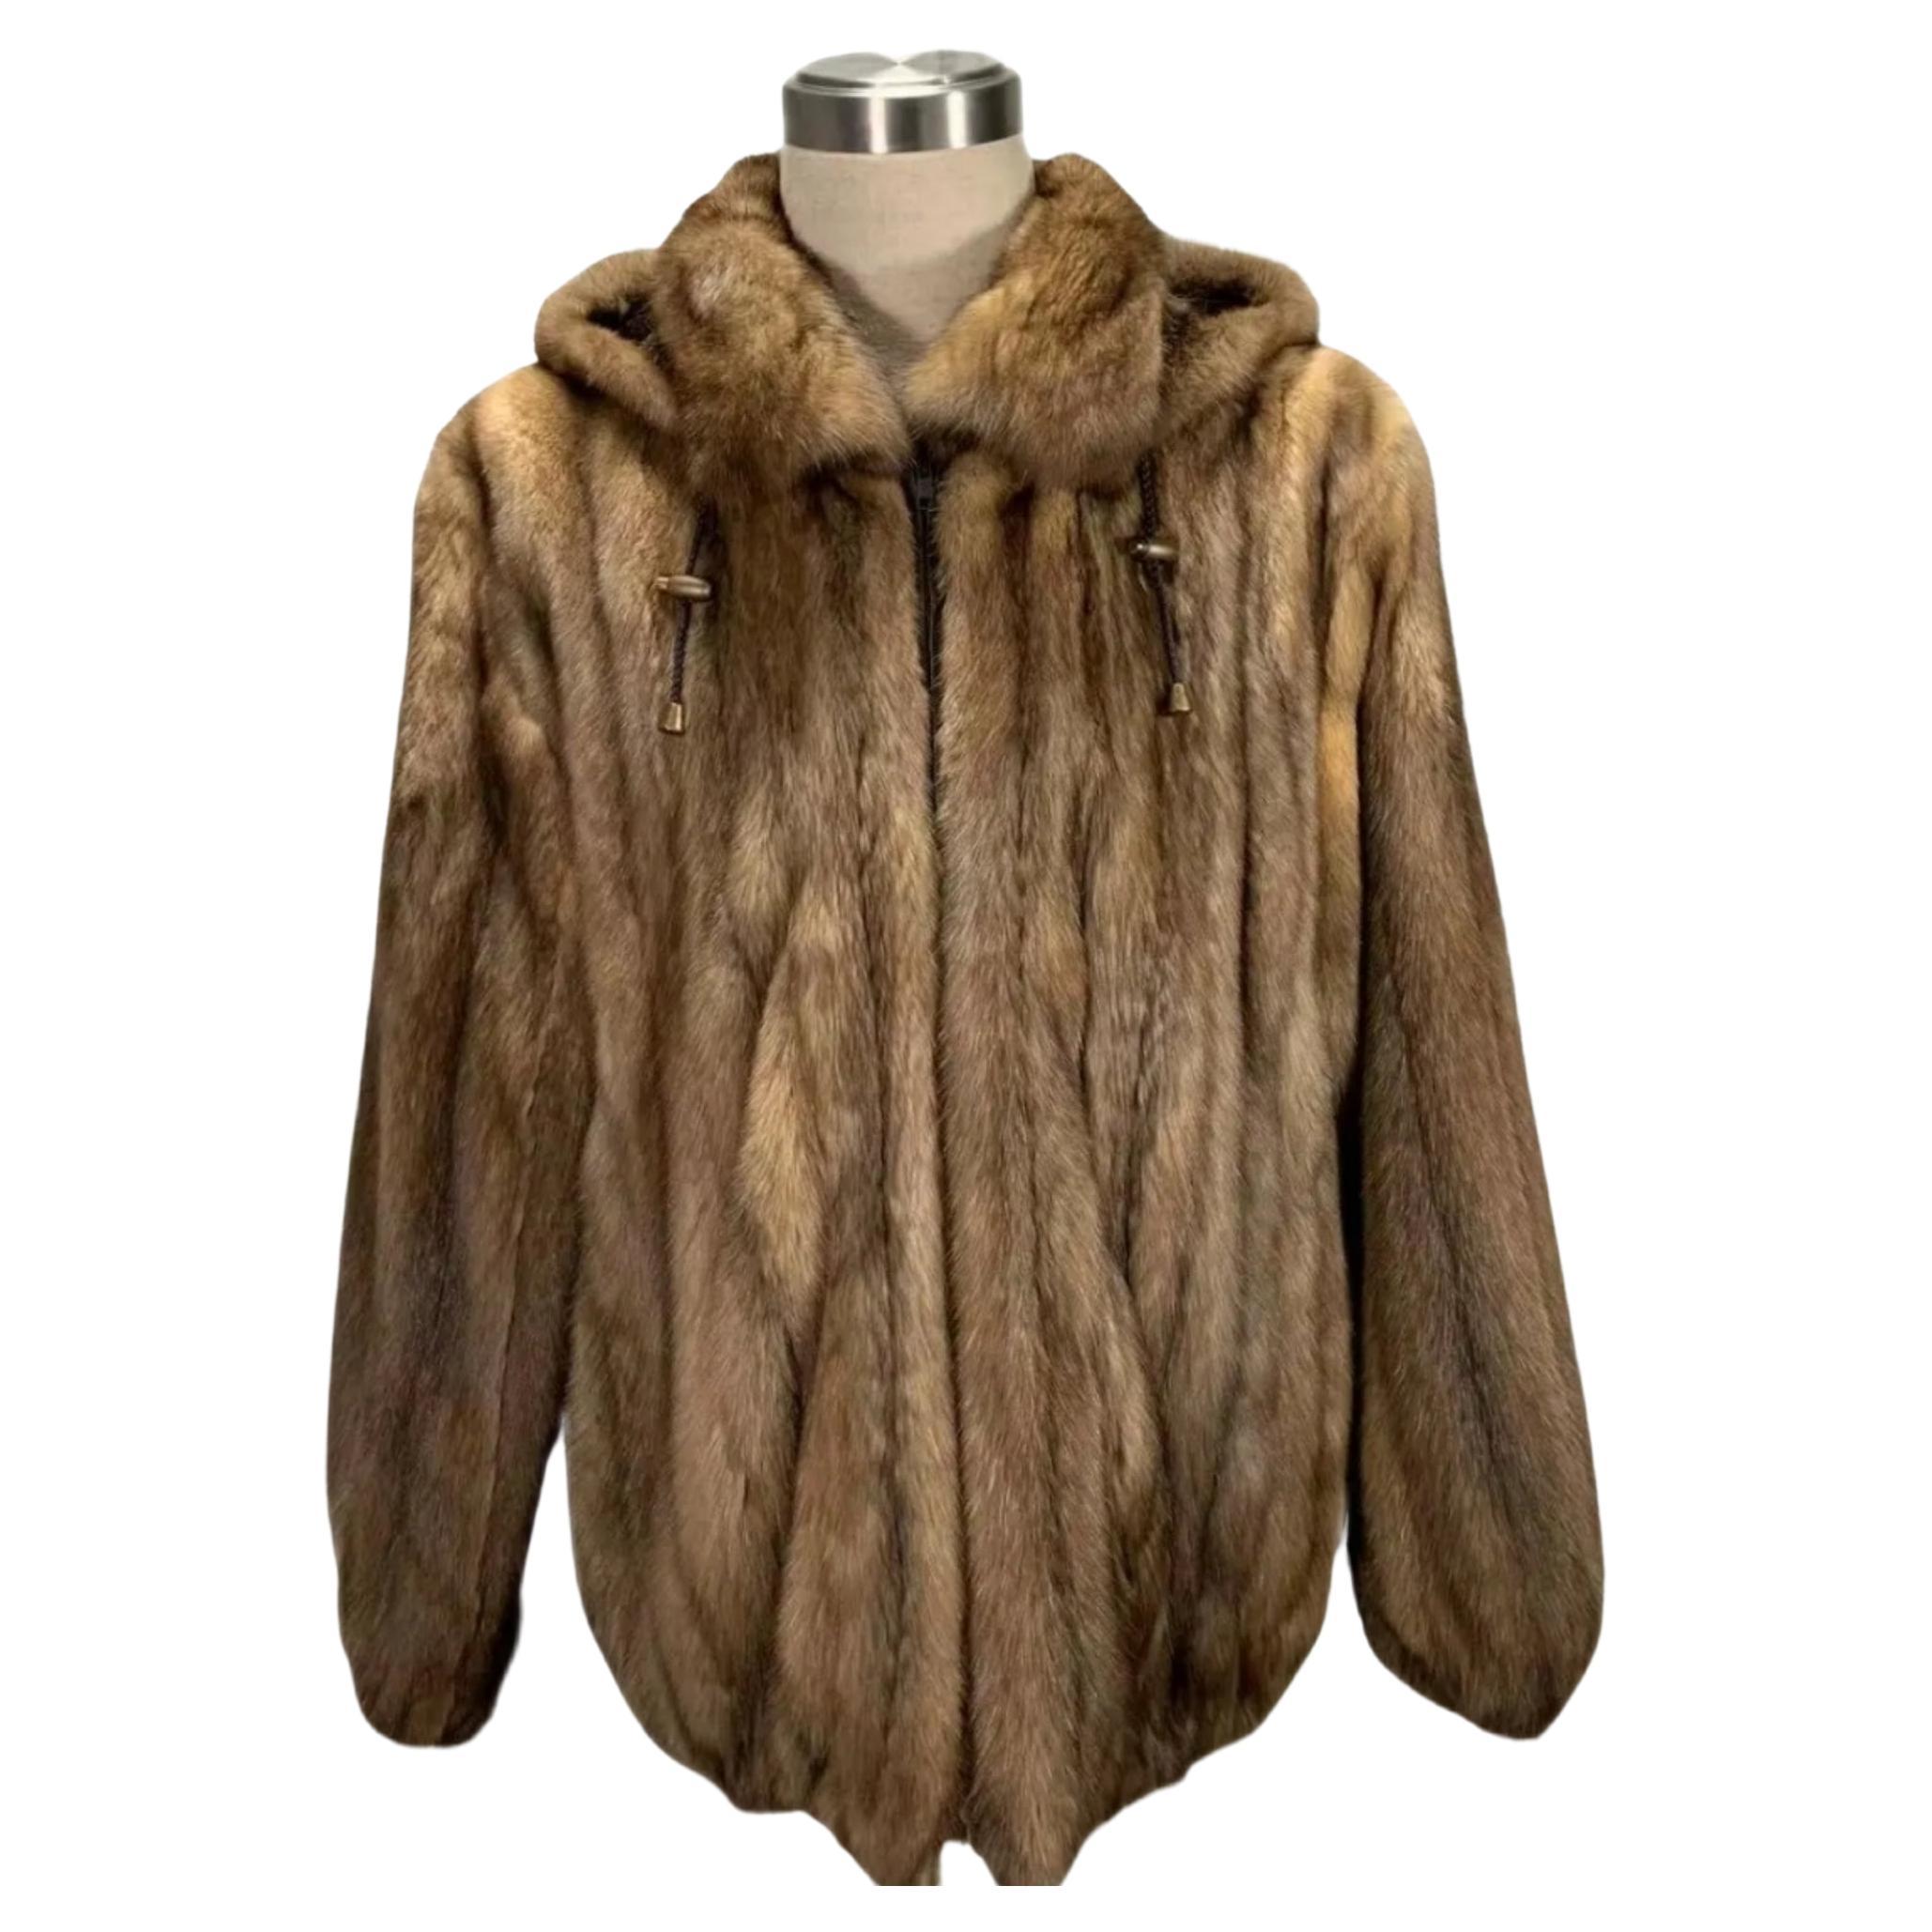 Brand new Big Tall  Men's Russian sable fur coat bomber jacket size 2 XL For Sale